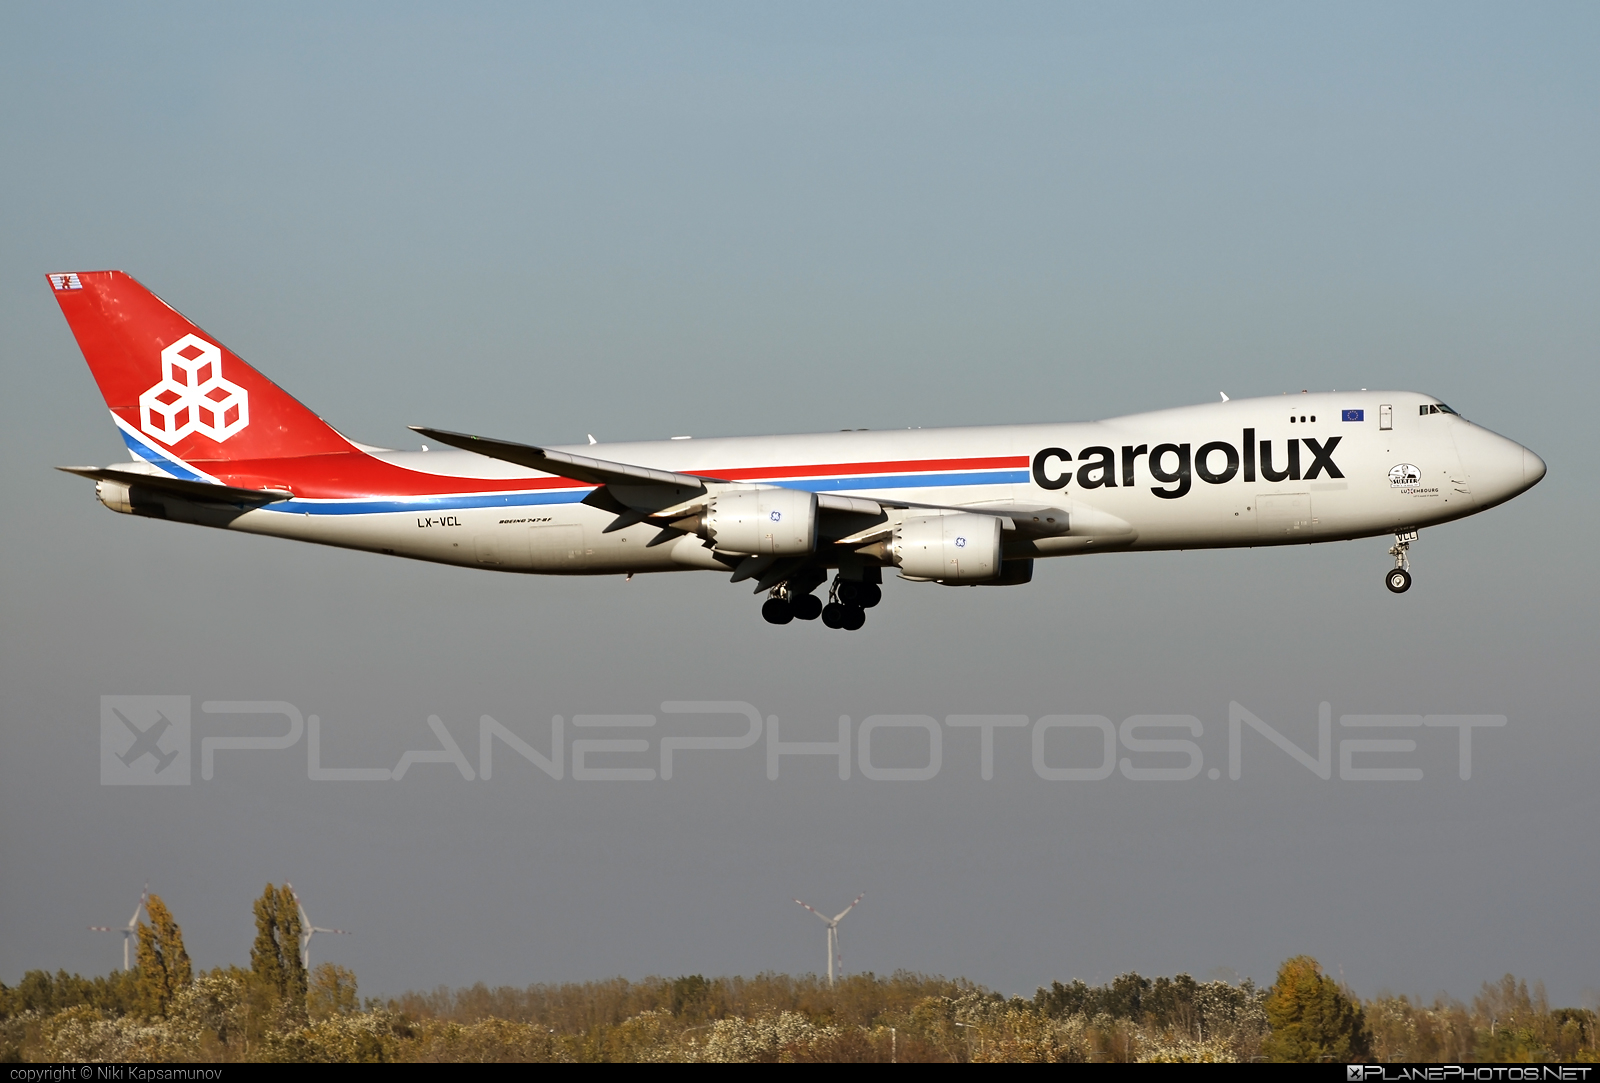 Boeing 747-8F - LX-VCL operated by Cargolux Airlines International #b747 #b747f #b747freighter #boeing #boeing747 #cargolux #jumbo